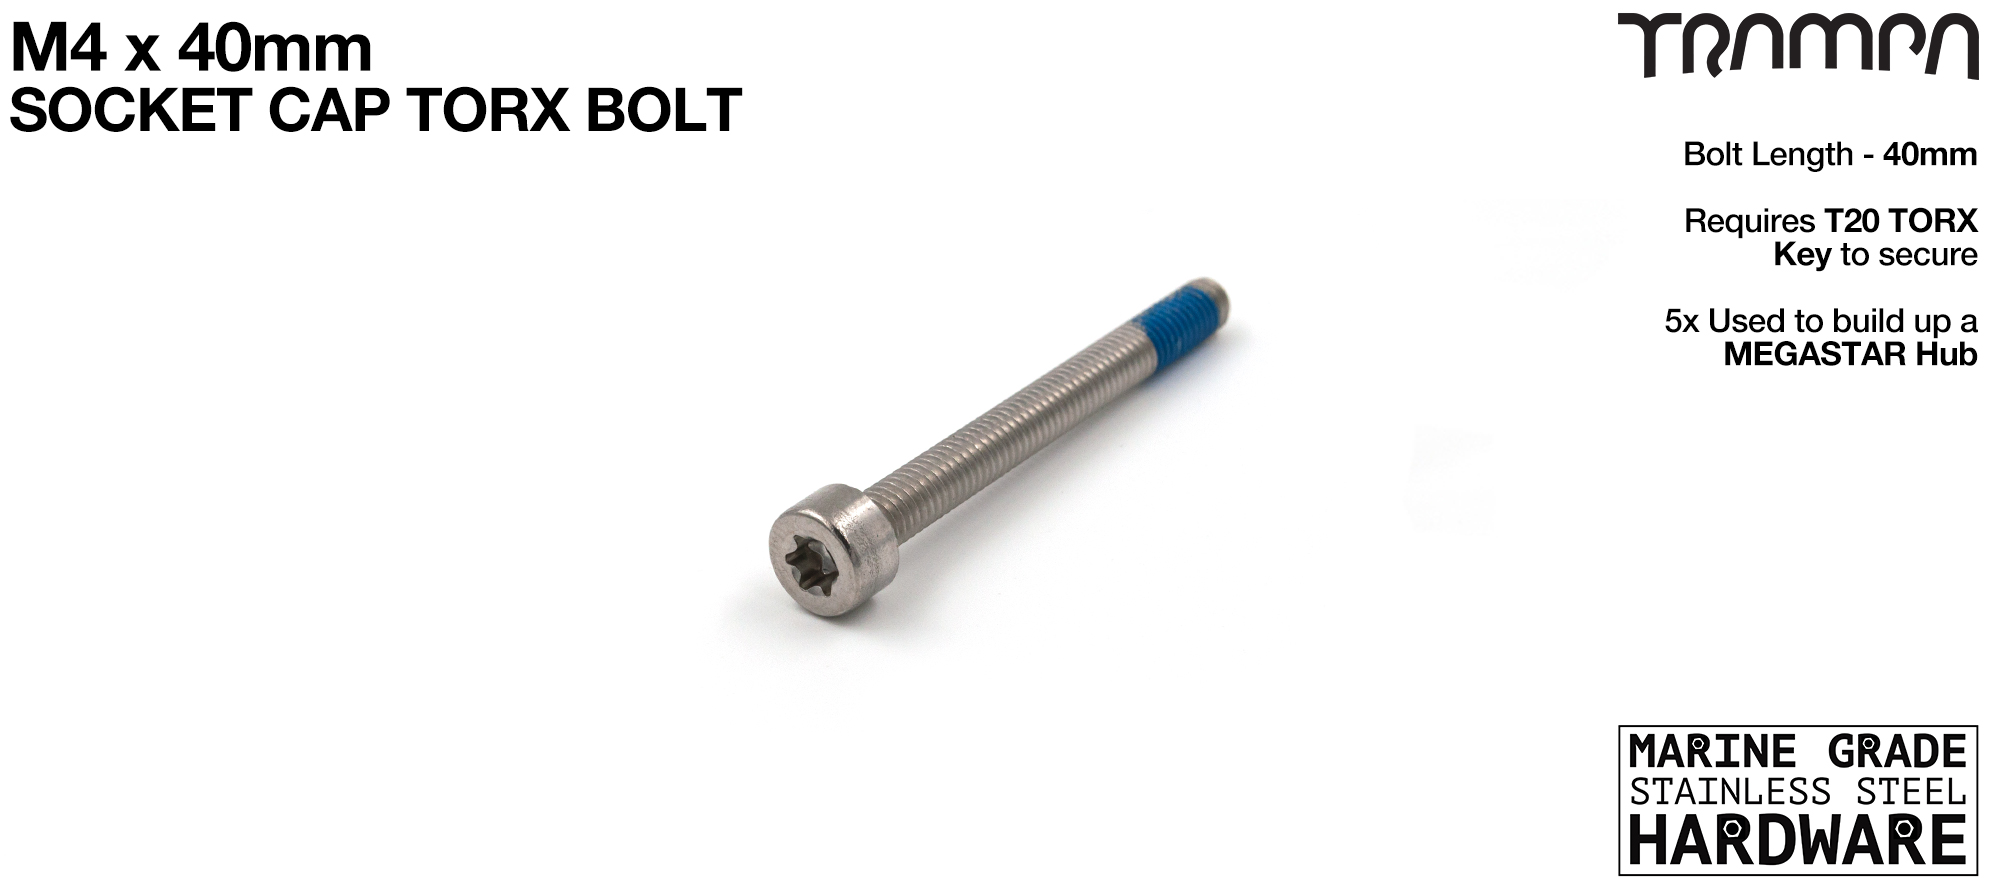 M4 x 40mm Socket Capped TORX Bolt - Marine Grade Stainless steel with locking paste 